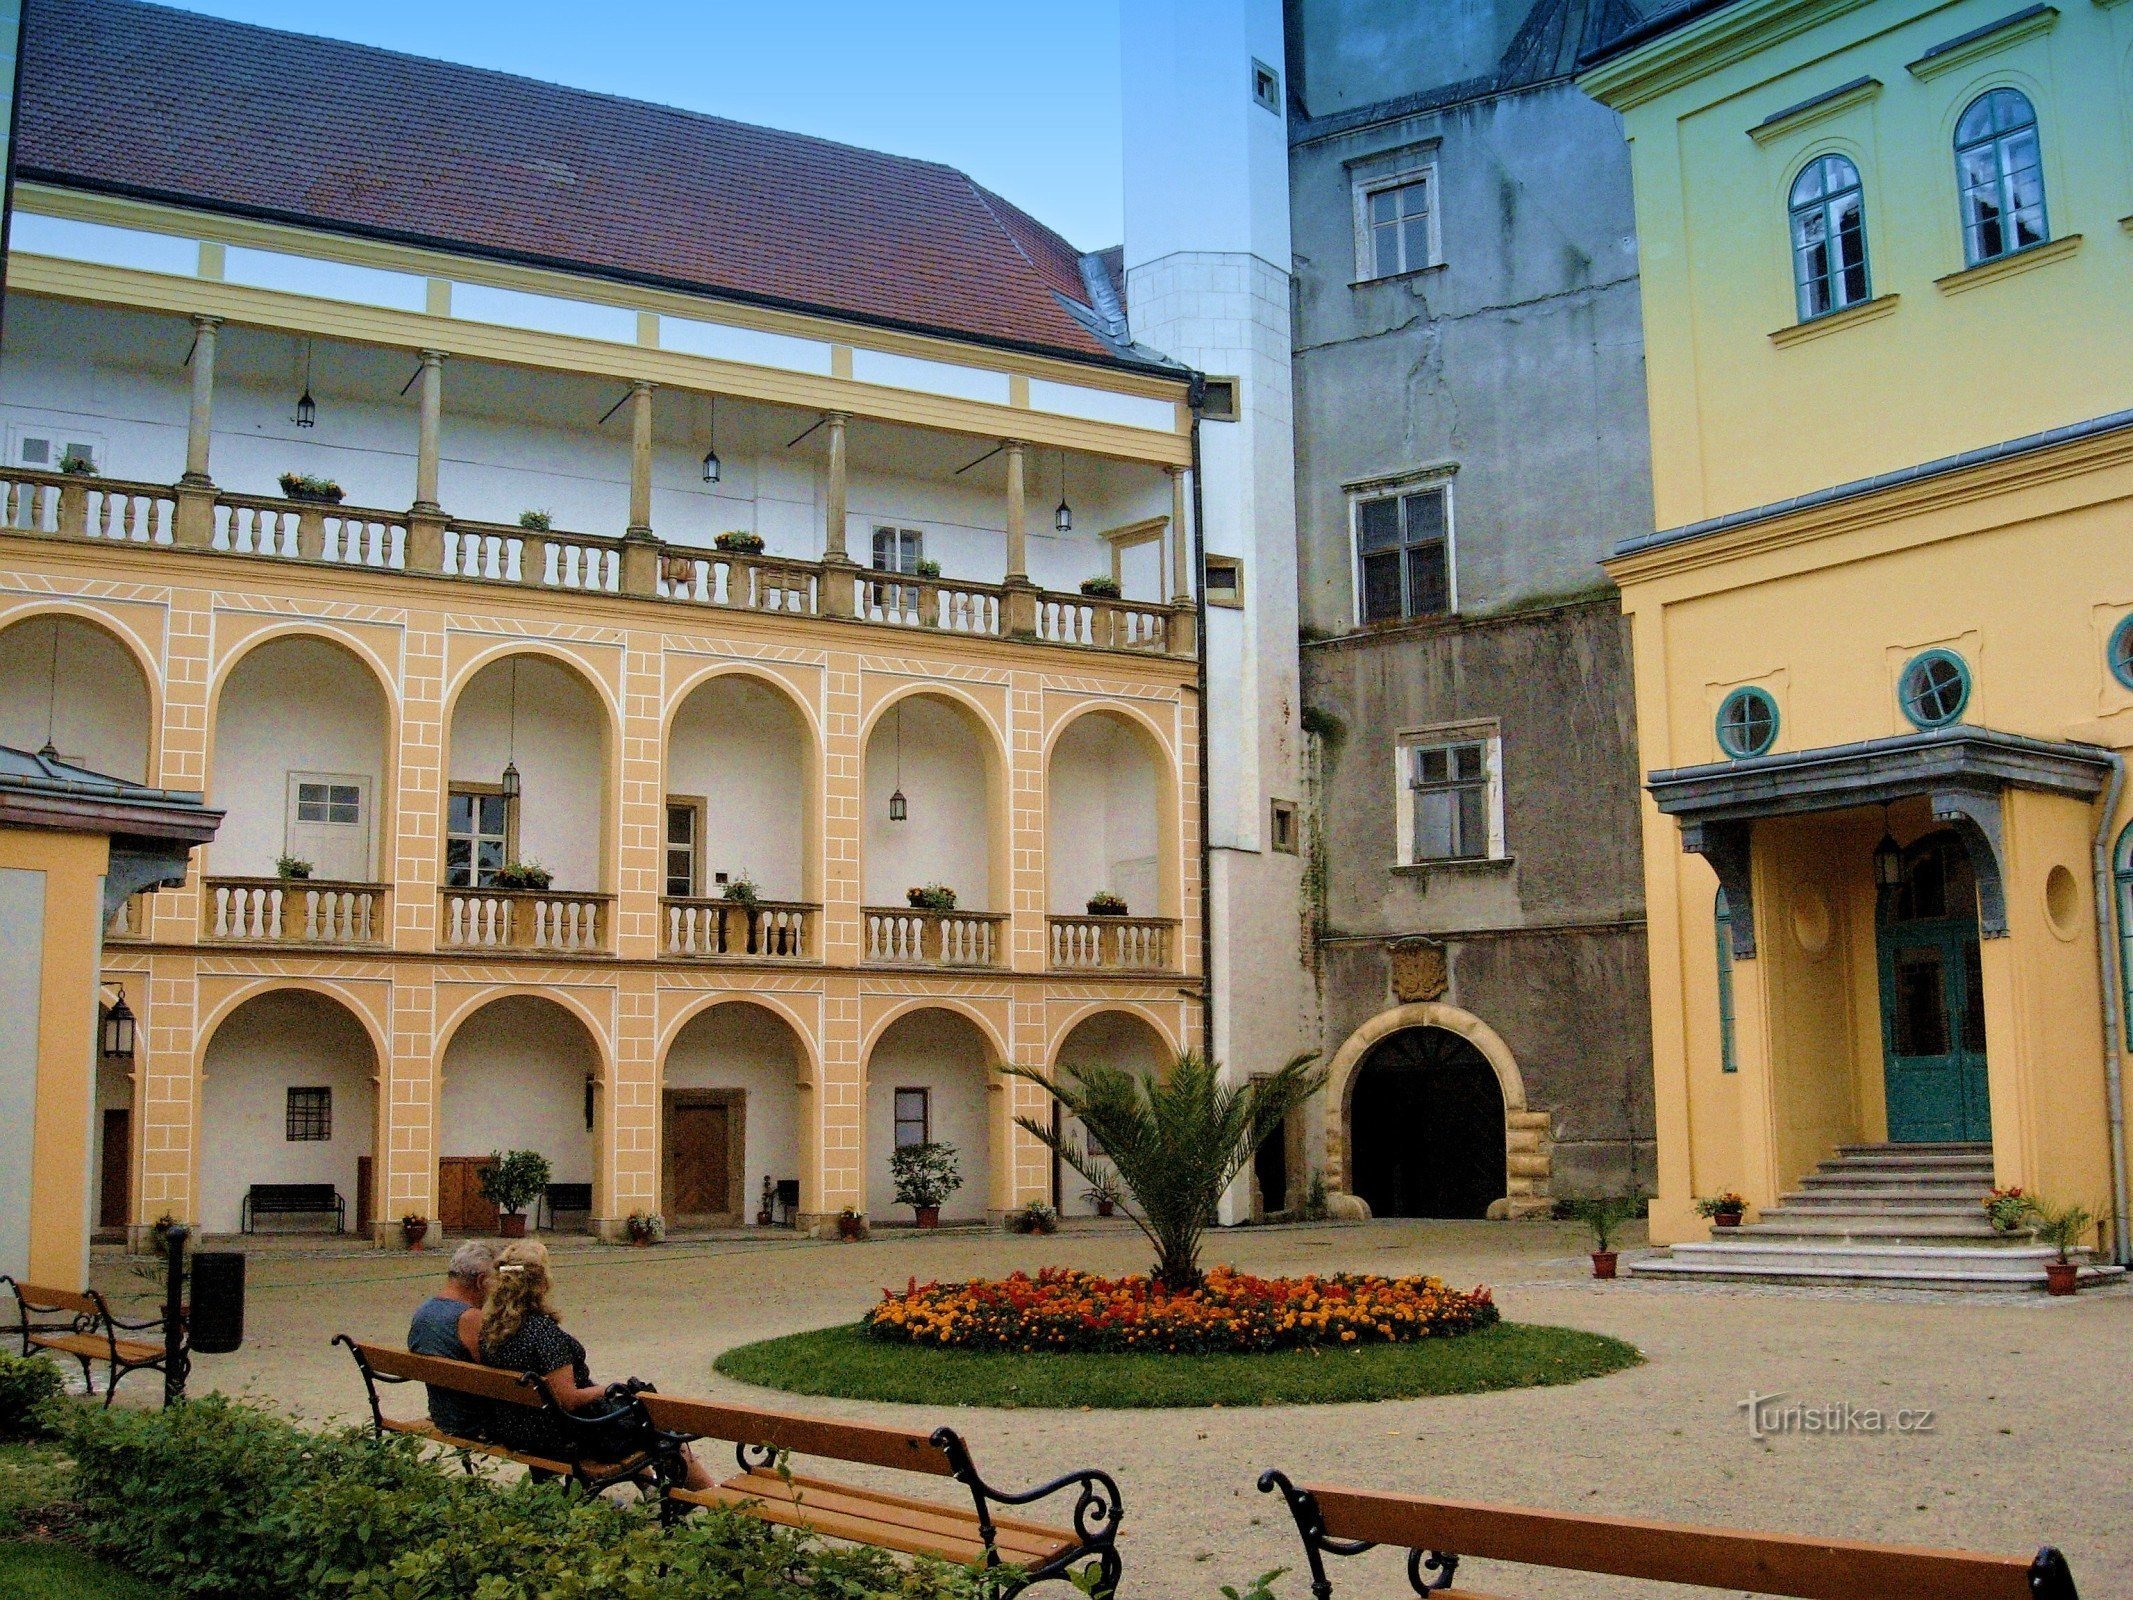 For an experience at the castle in Tovačov